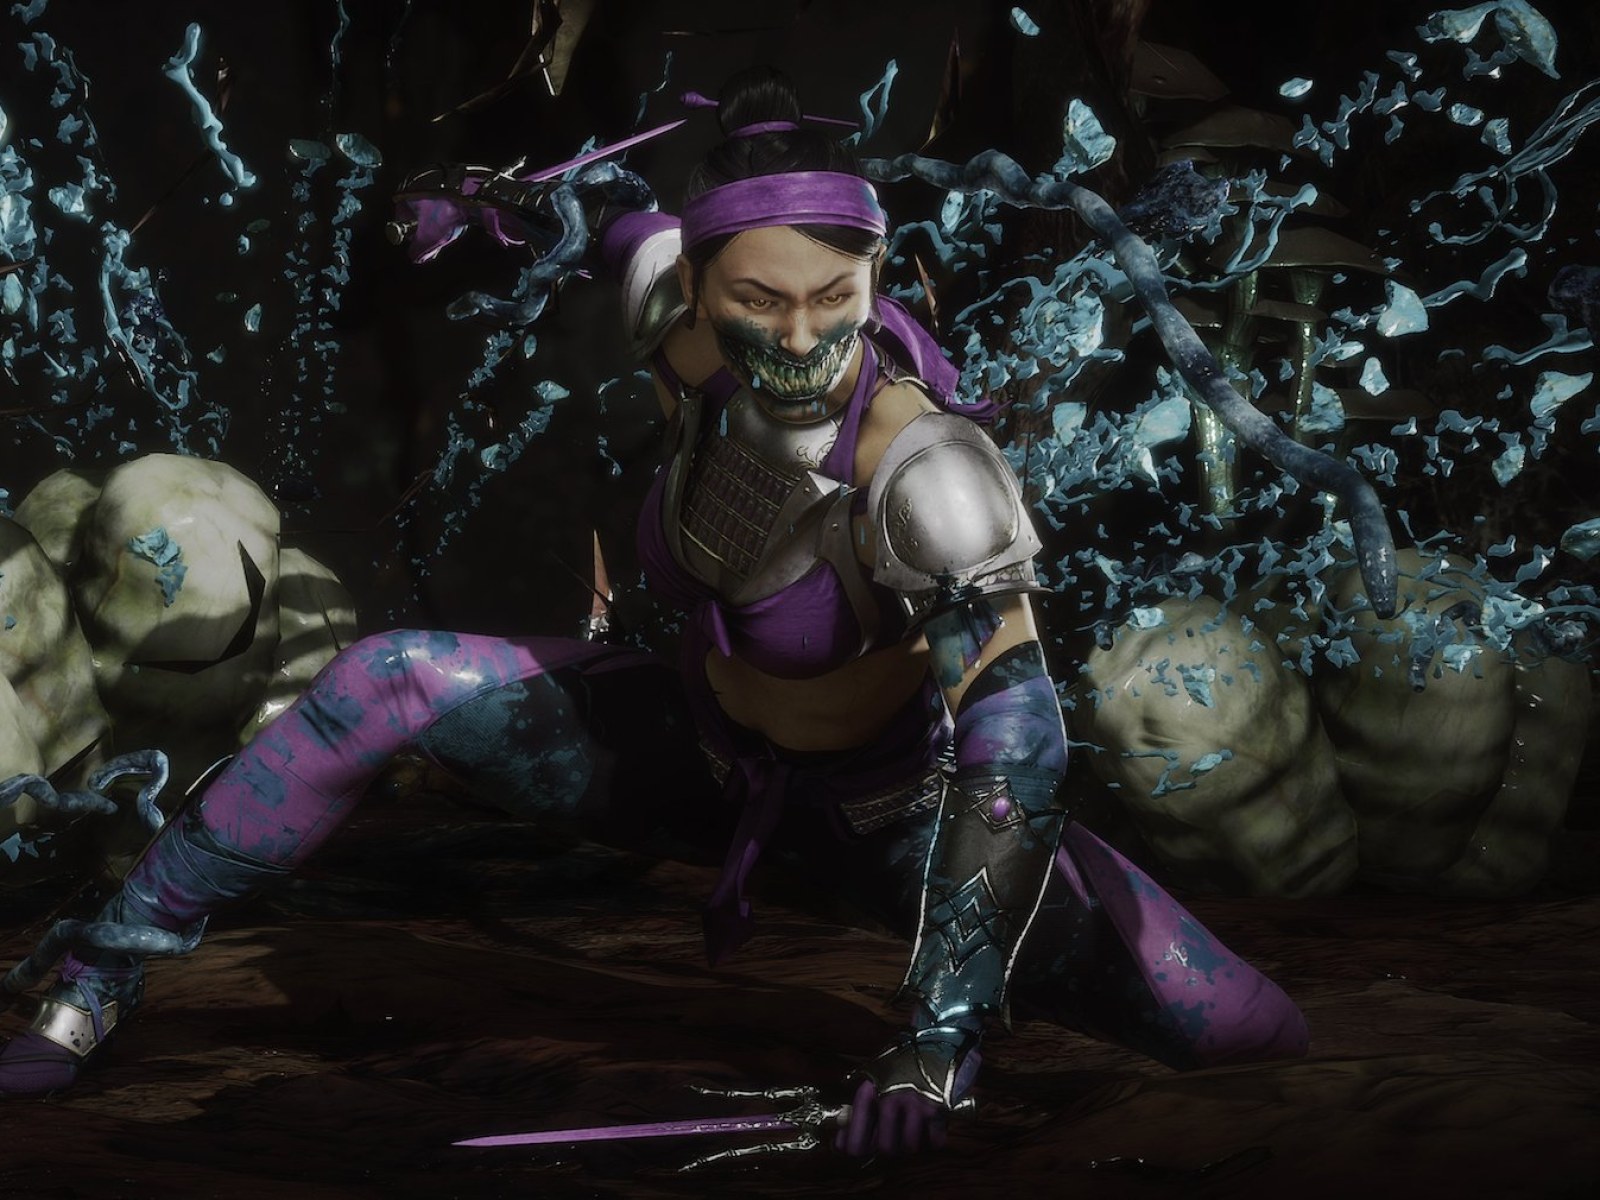 How to Perform Every Fatality in Mortal Kombat 11